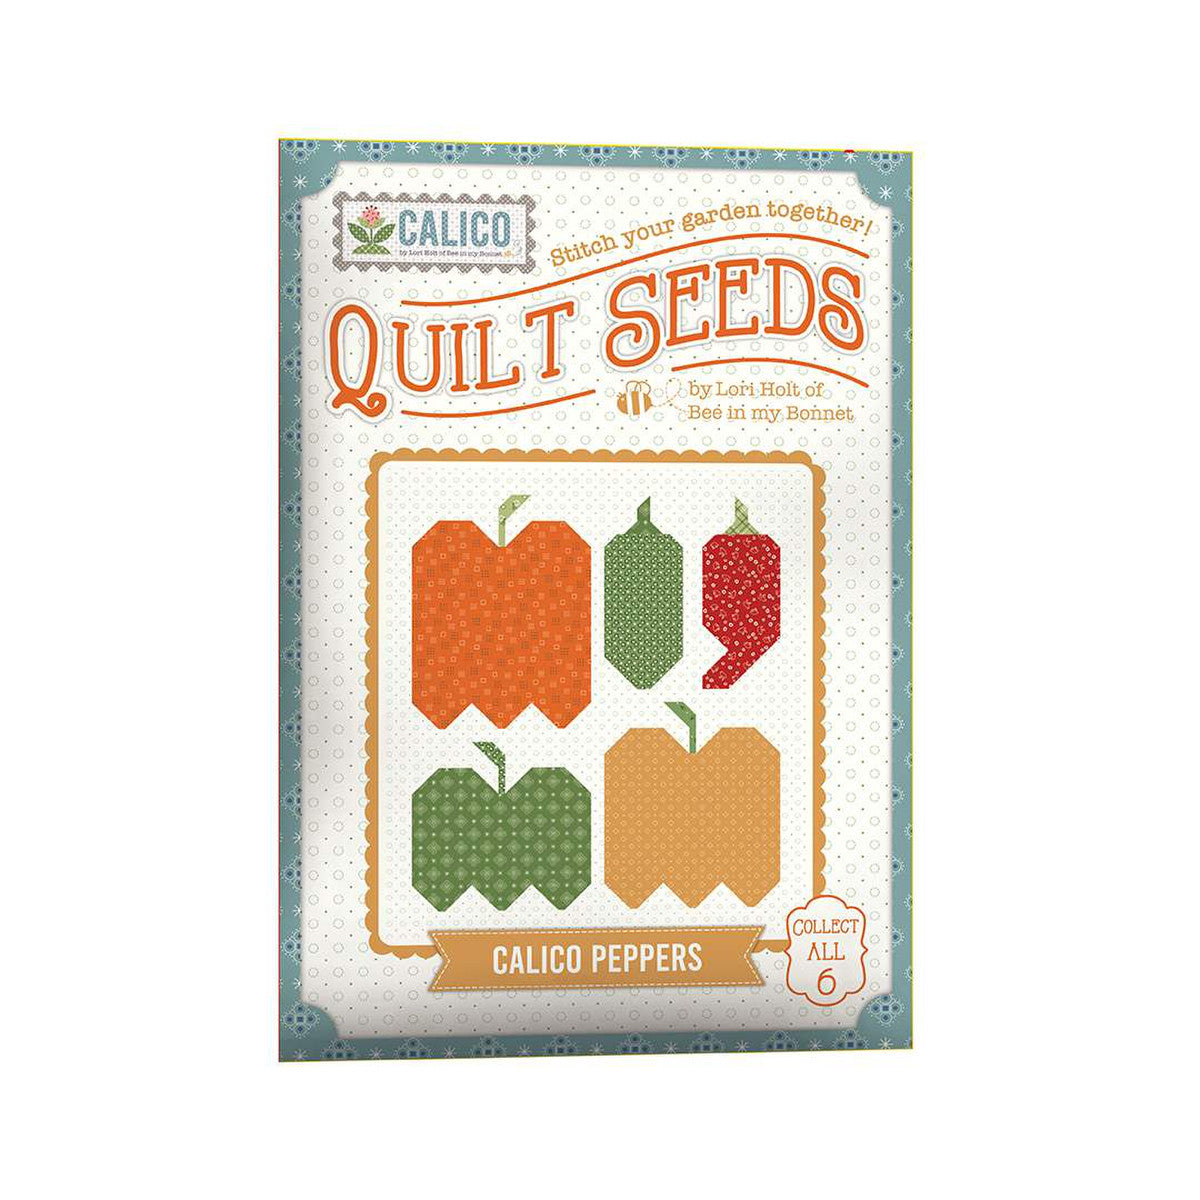 Lori Holt Quilt Seeds™ Pattern Calico Peppers